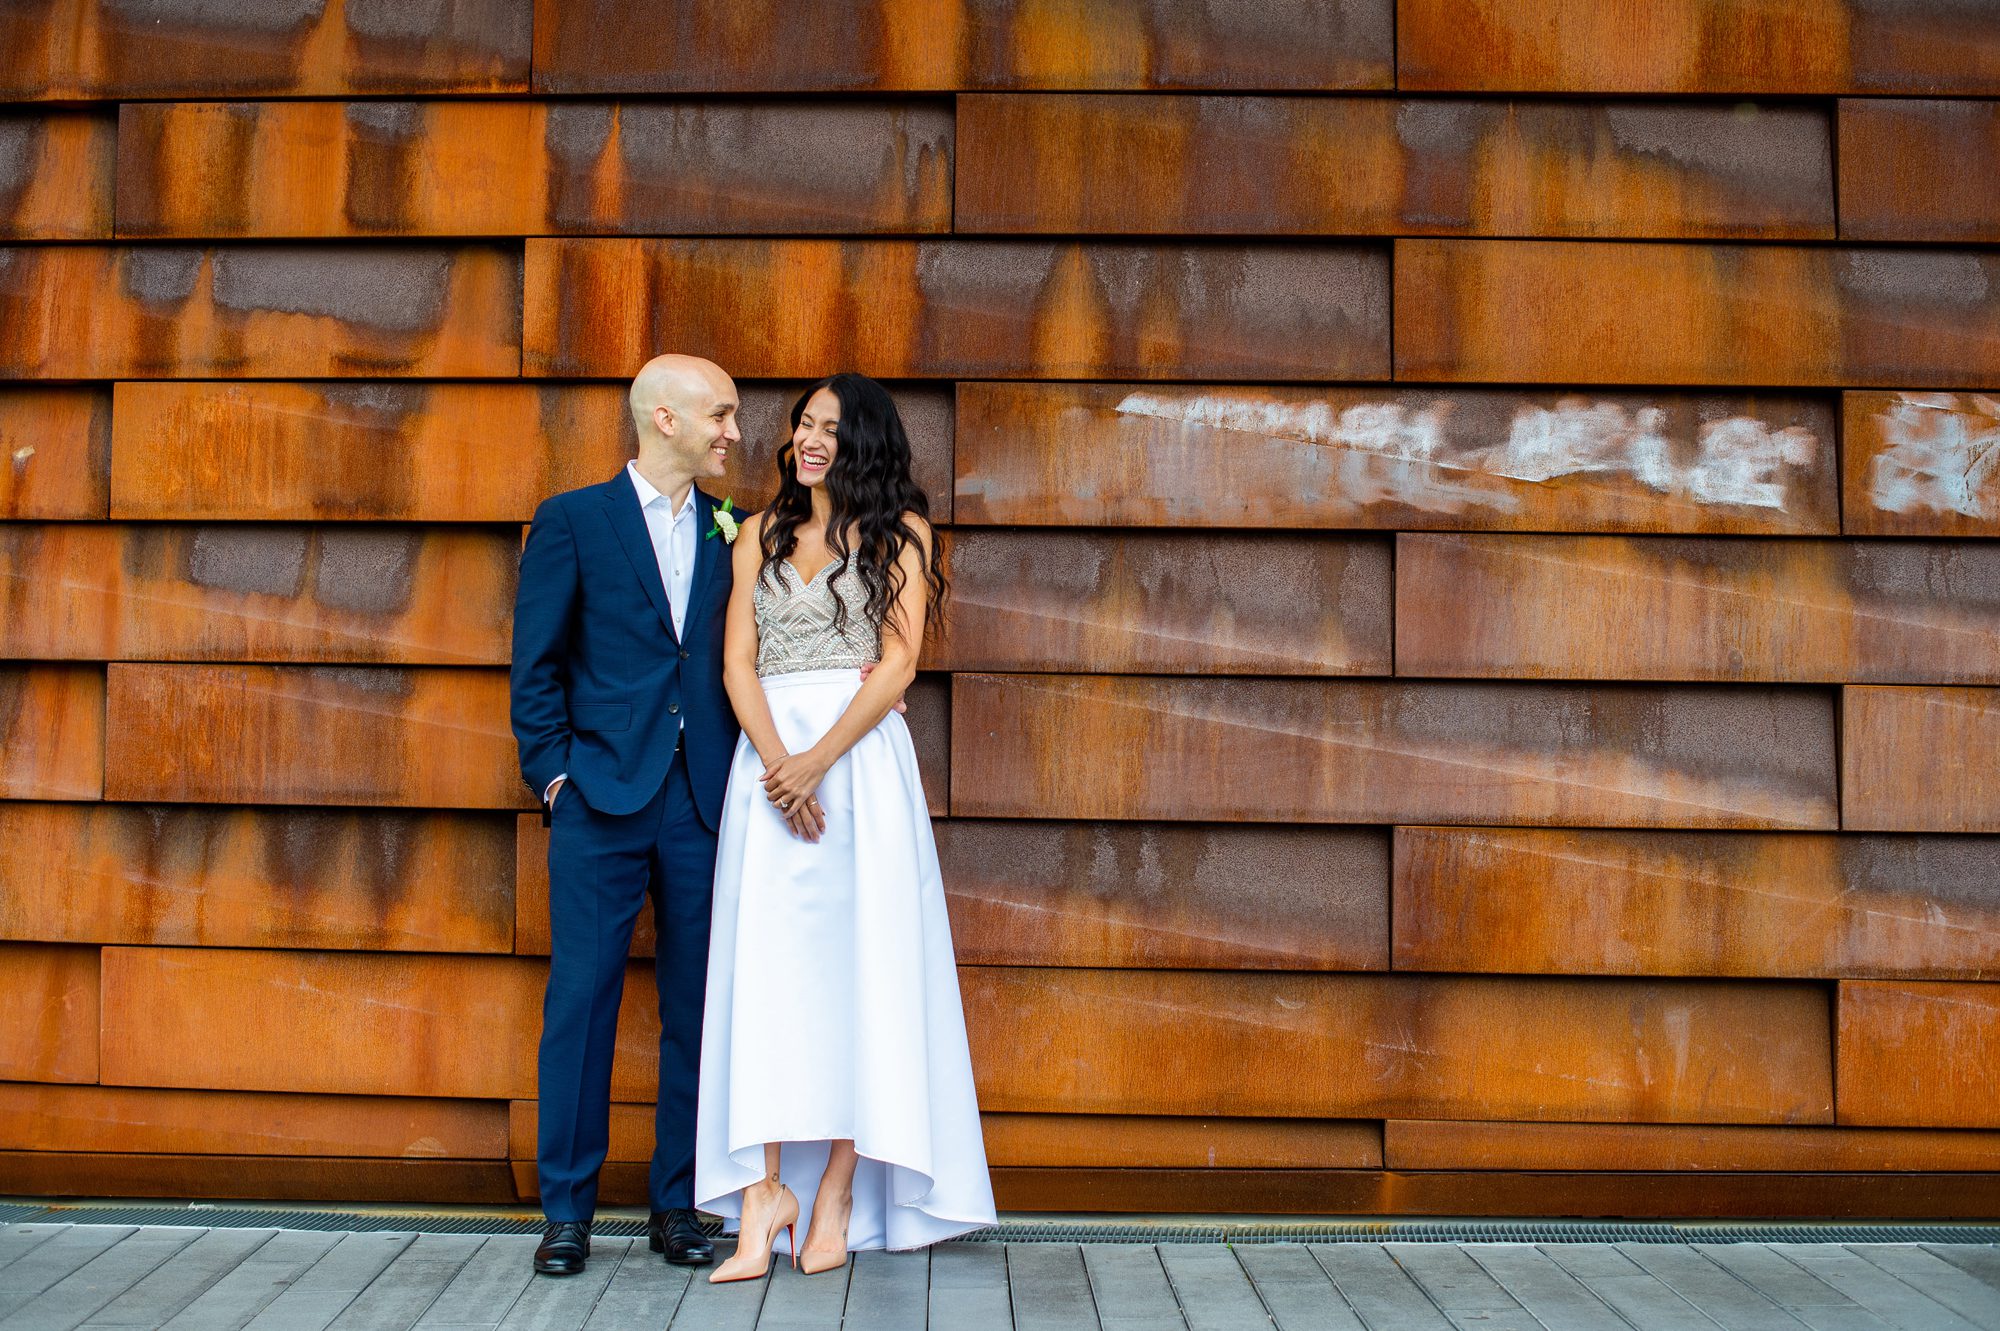 Fun Locations for NYC Elopement 